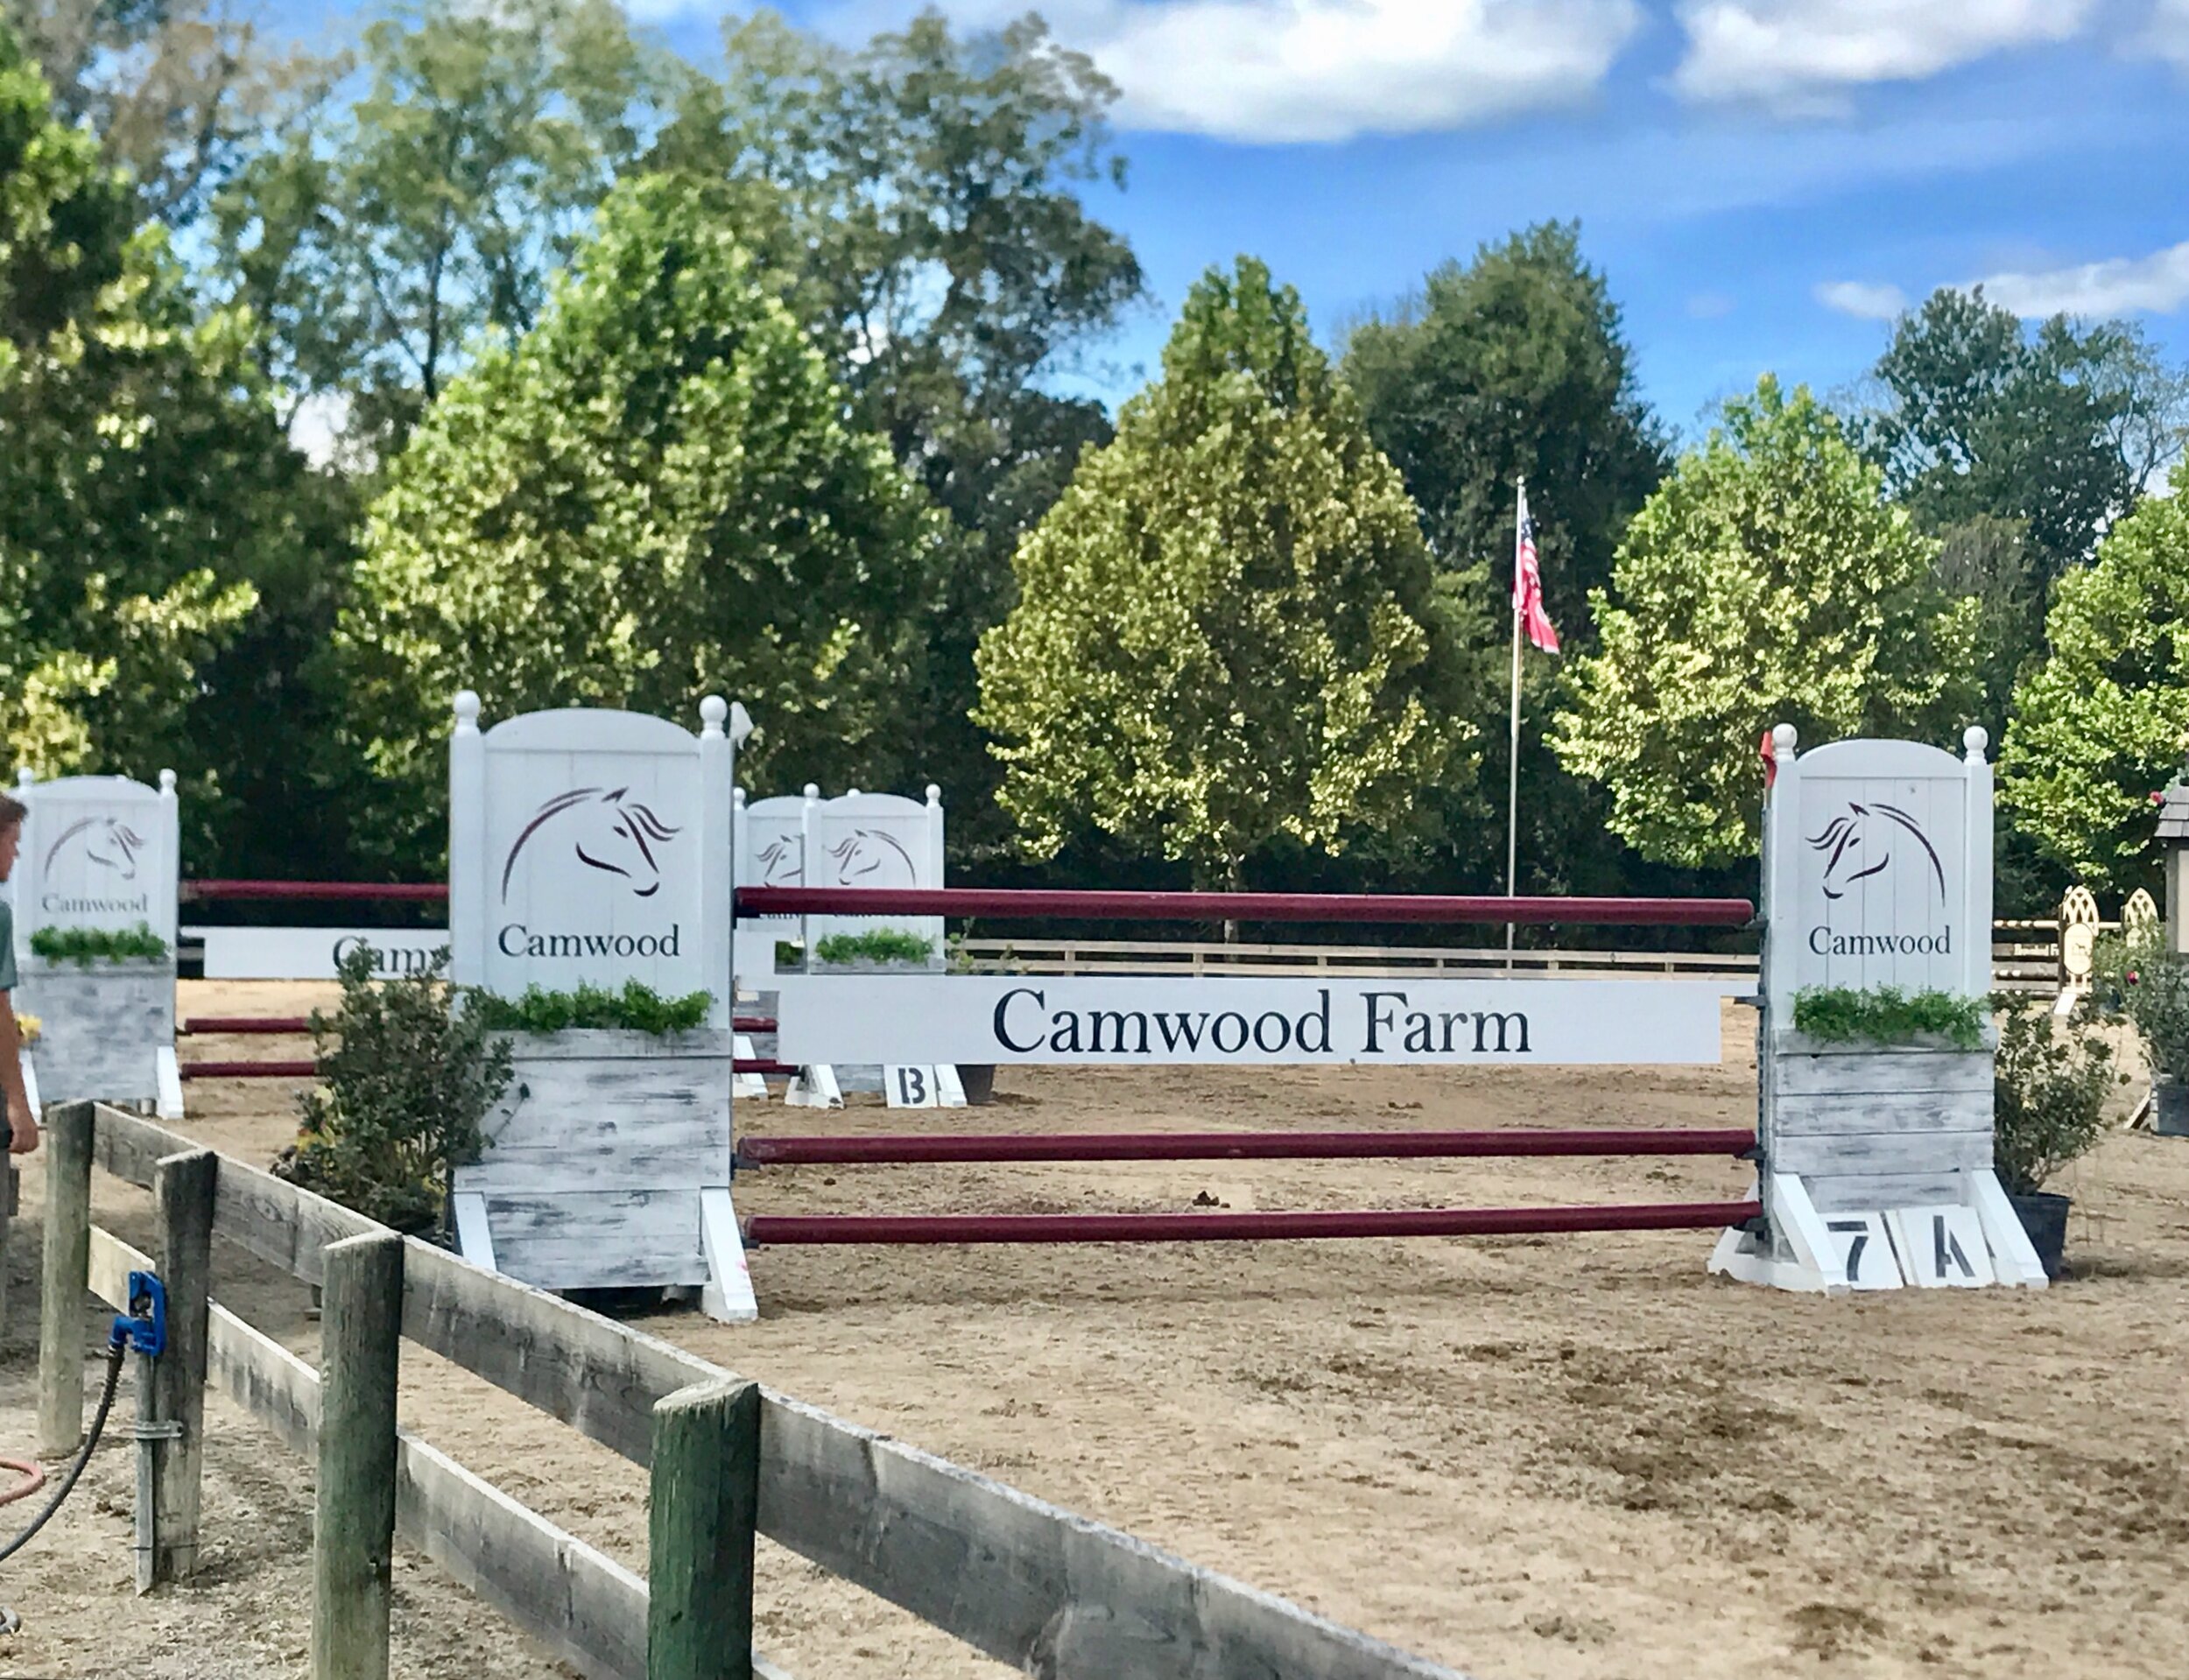 Standards and Panel set up for Horse Show